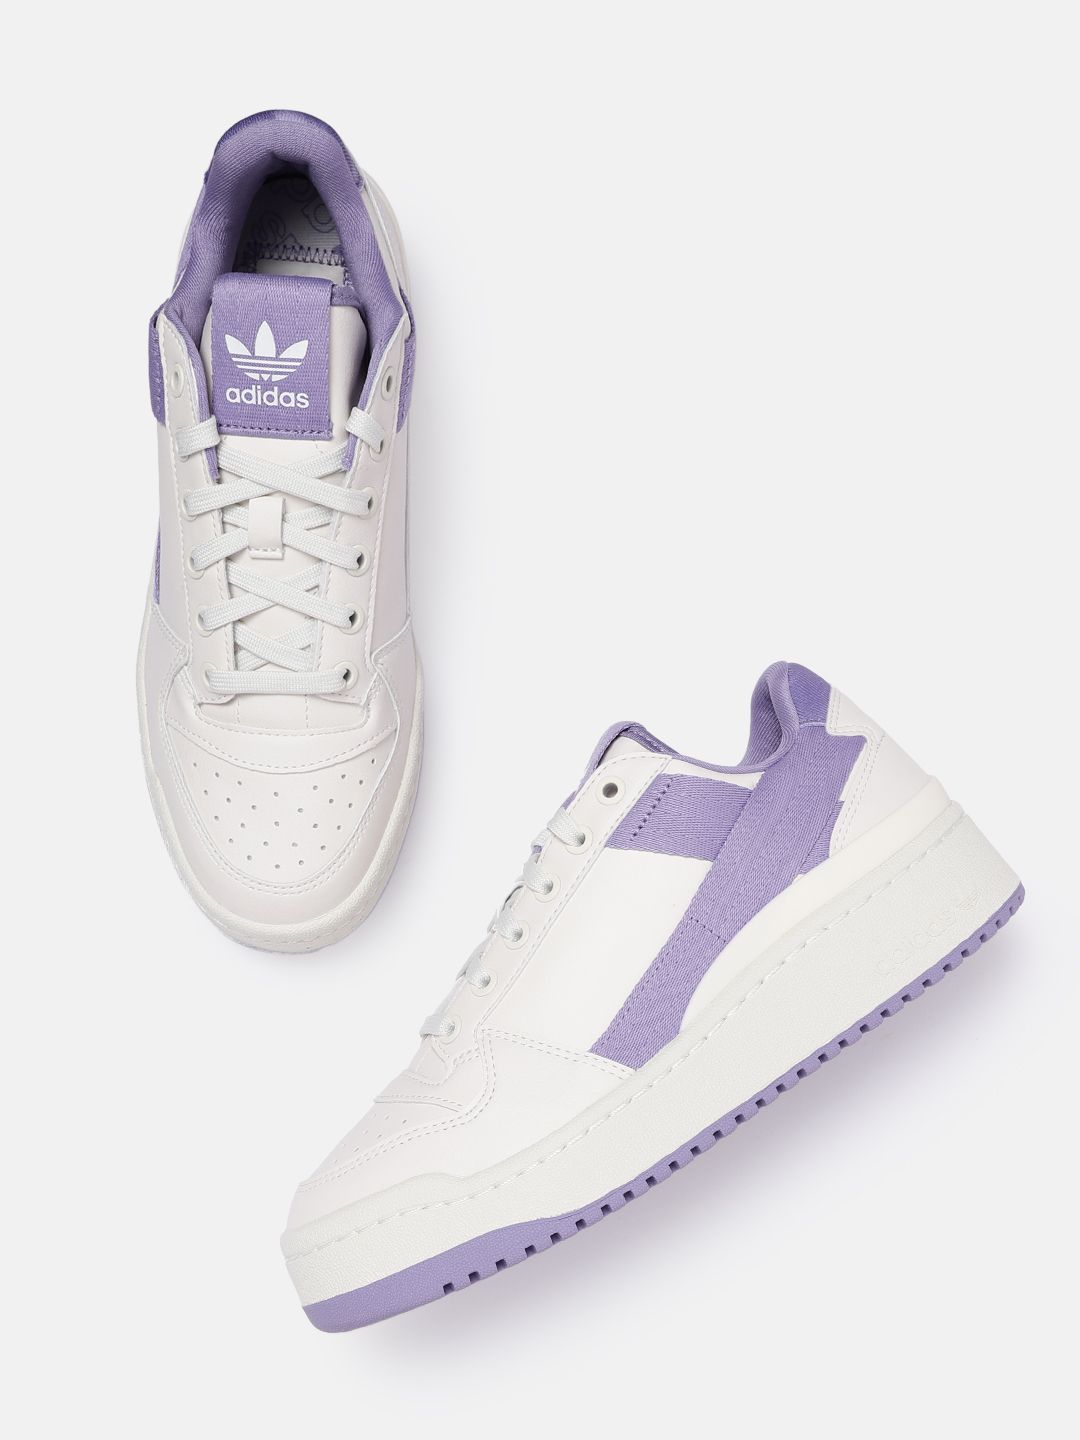 ADIDAS Originals Women Off-White & Lilac Perforated Forum Bold Parley Sneakers Price in India